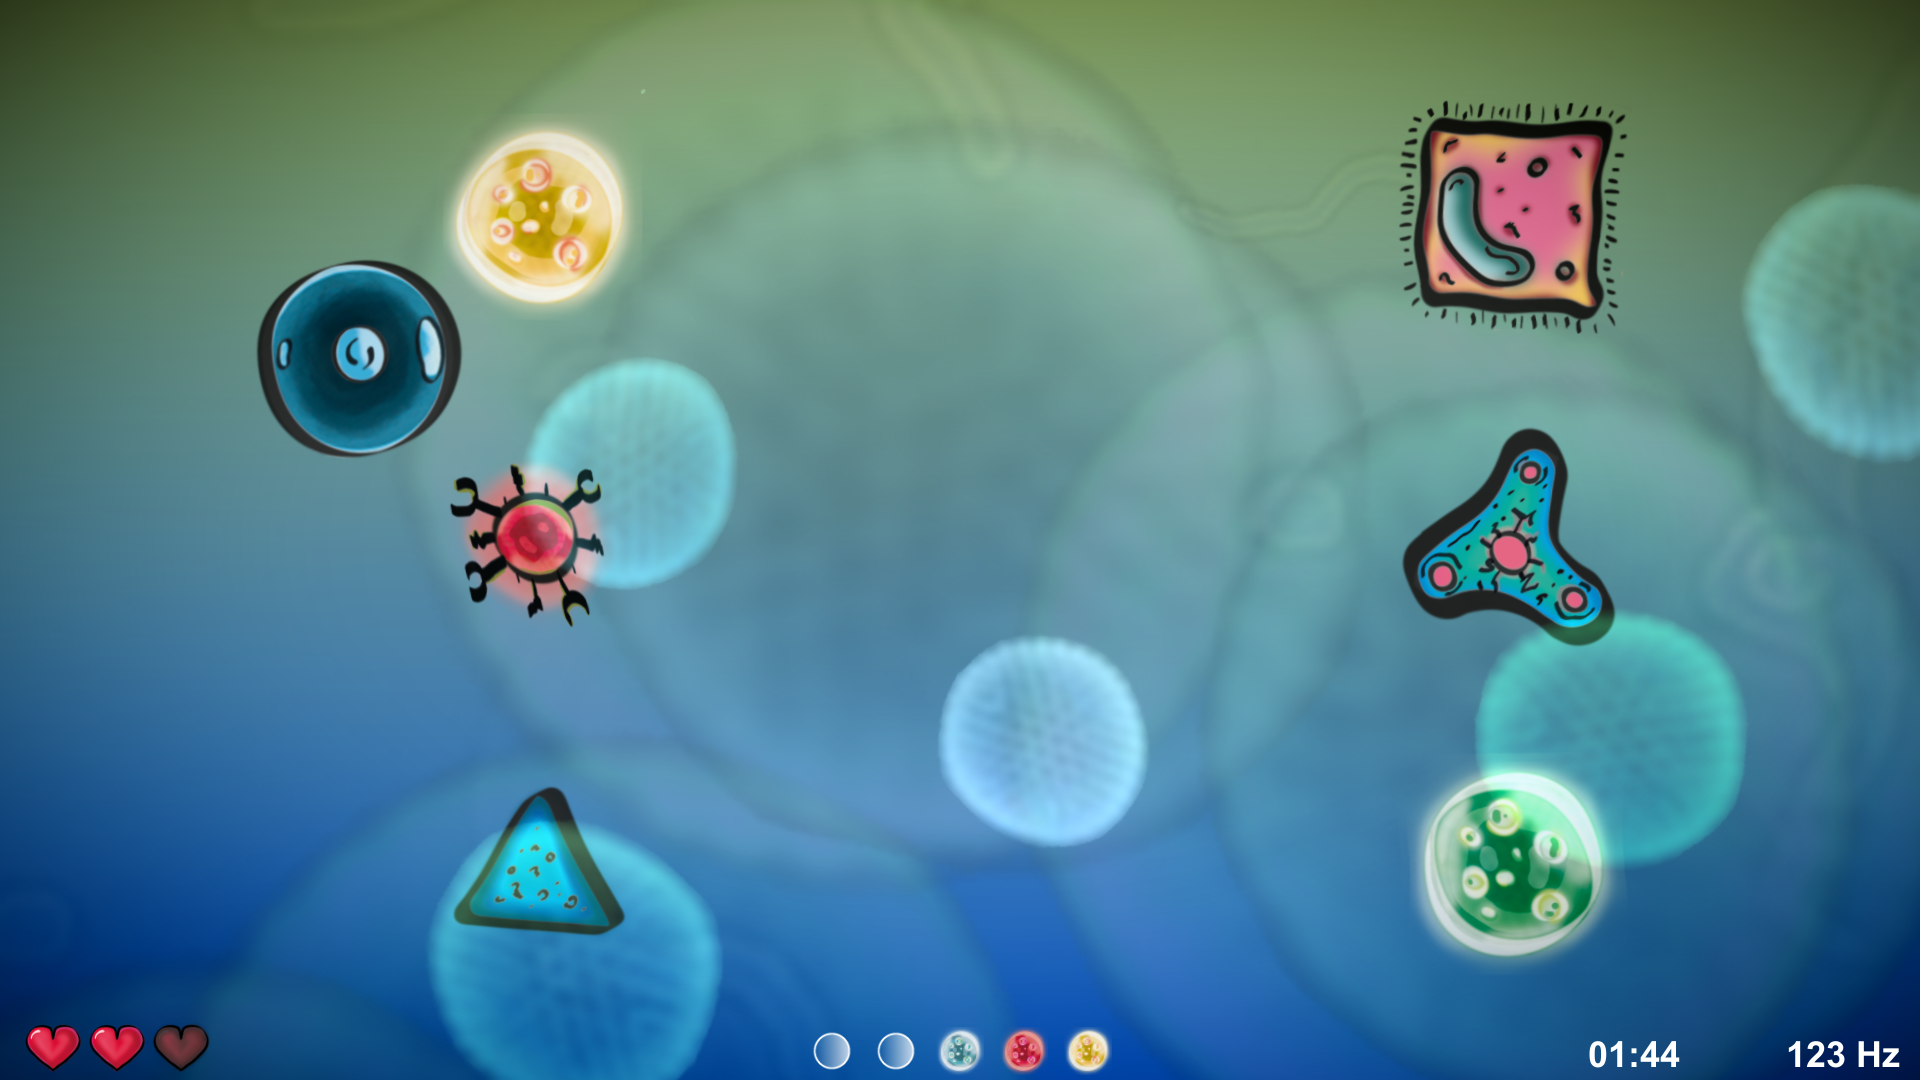 Screenshot of the game 'Amplify'. The controllable character is on the left side. Enemies, obstacles and collectibles (all appearing as abstract, but distinct shapes) float towards it from the right. At the bottom of the screen are several ui elements: the health of the player, collected orbs, the elapsed time and the last emitted frequency. The background shows microscopic appearing objects in front of a vertical color gradient.